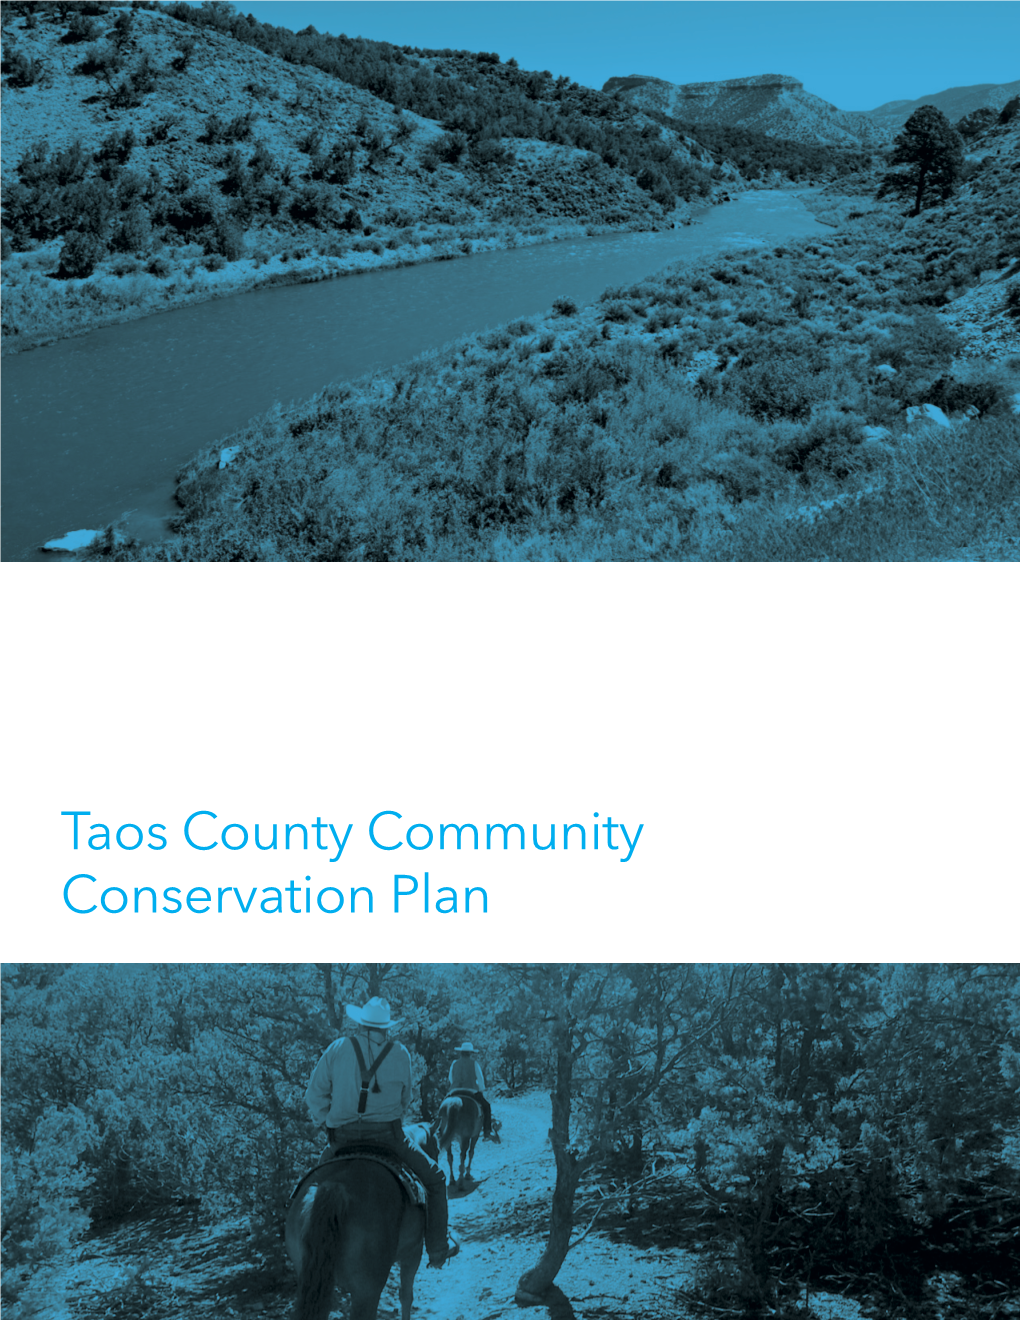 Taos County Community Conservation Plan